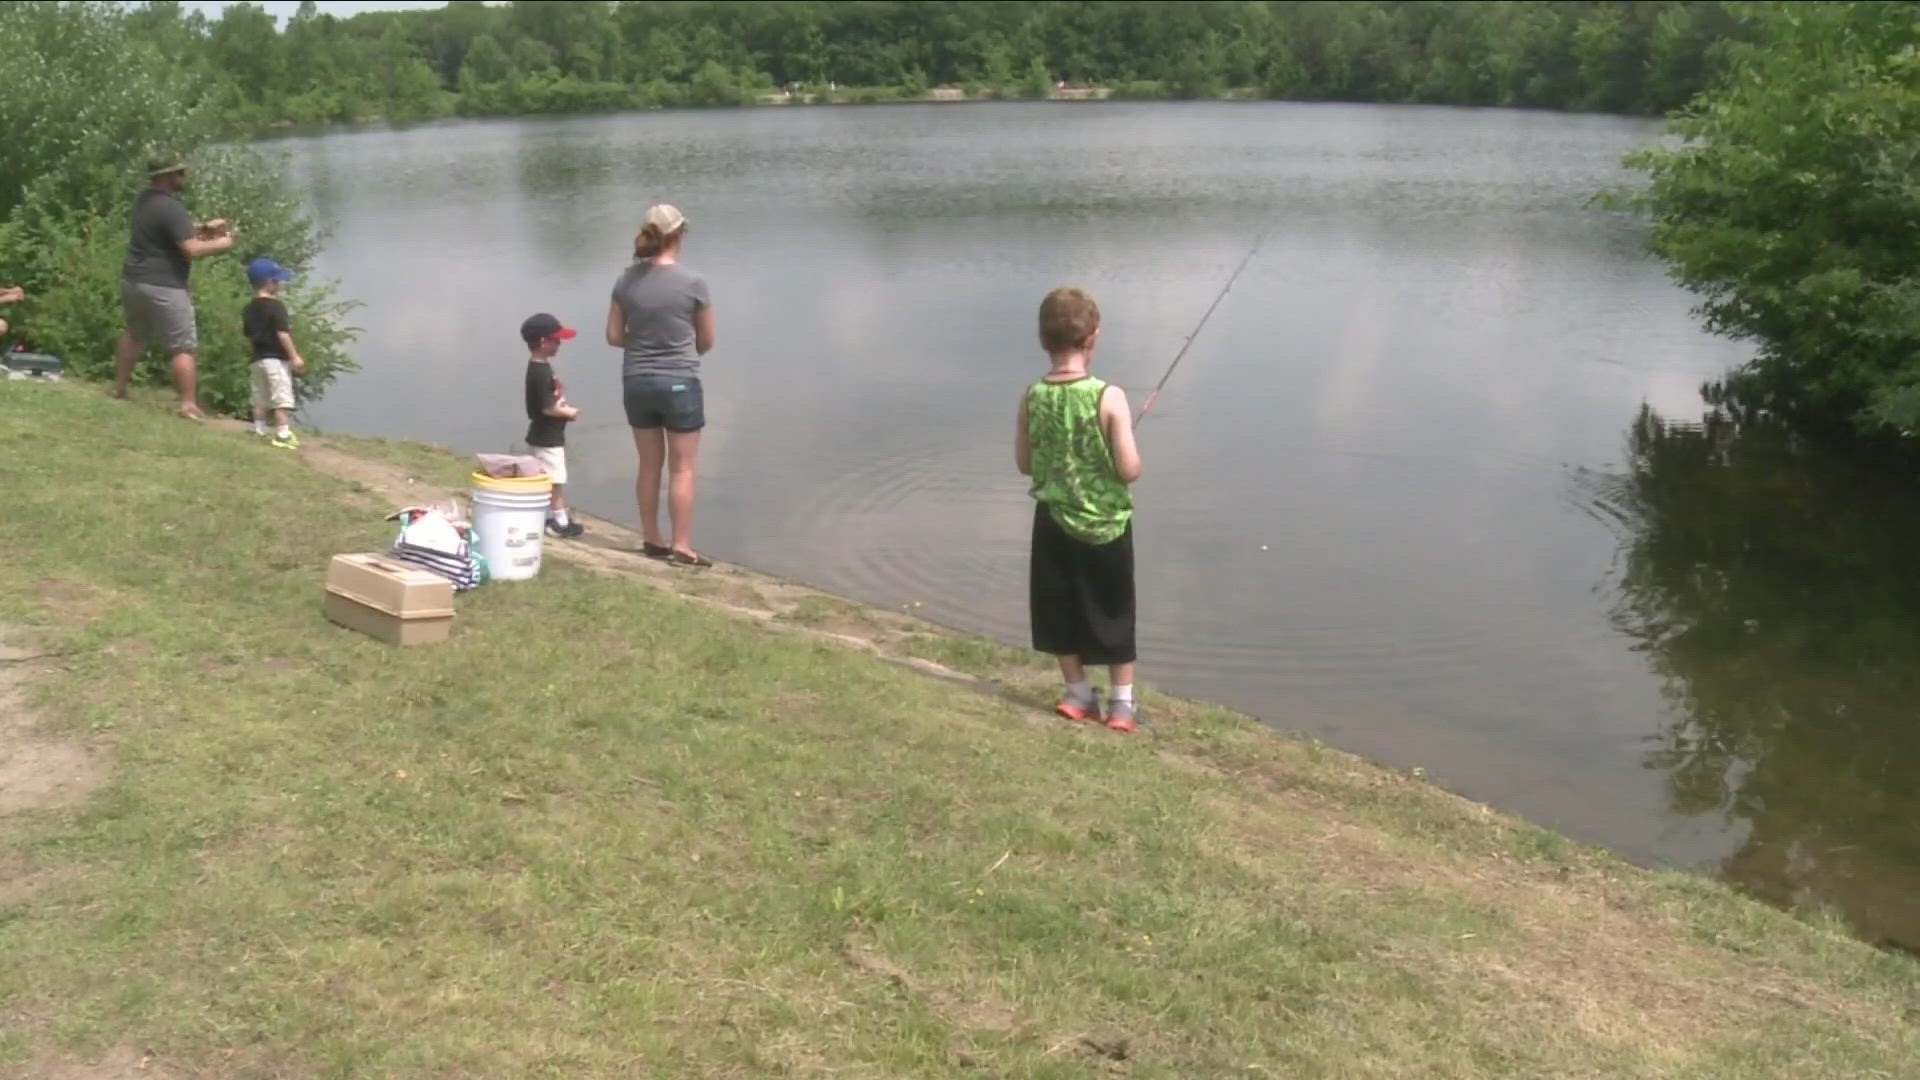 THE NEXT FREE FISHING DATES ARE SCHEDULED FOR JUNE 24 AND 25.